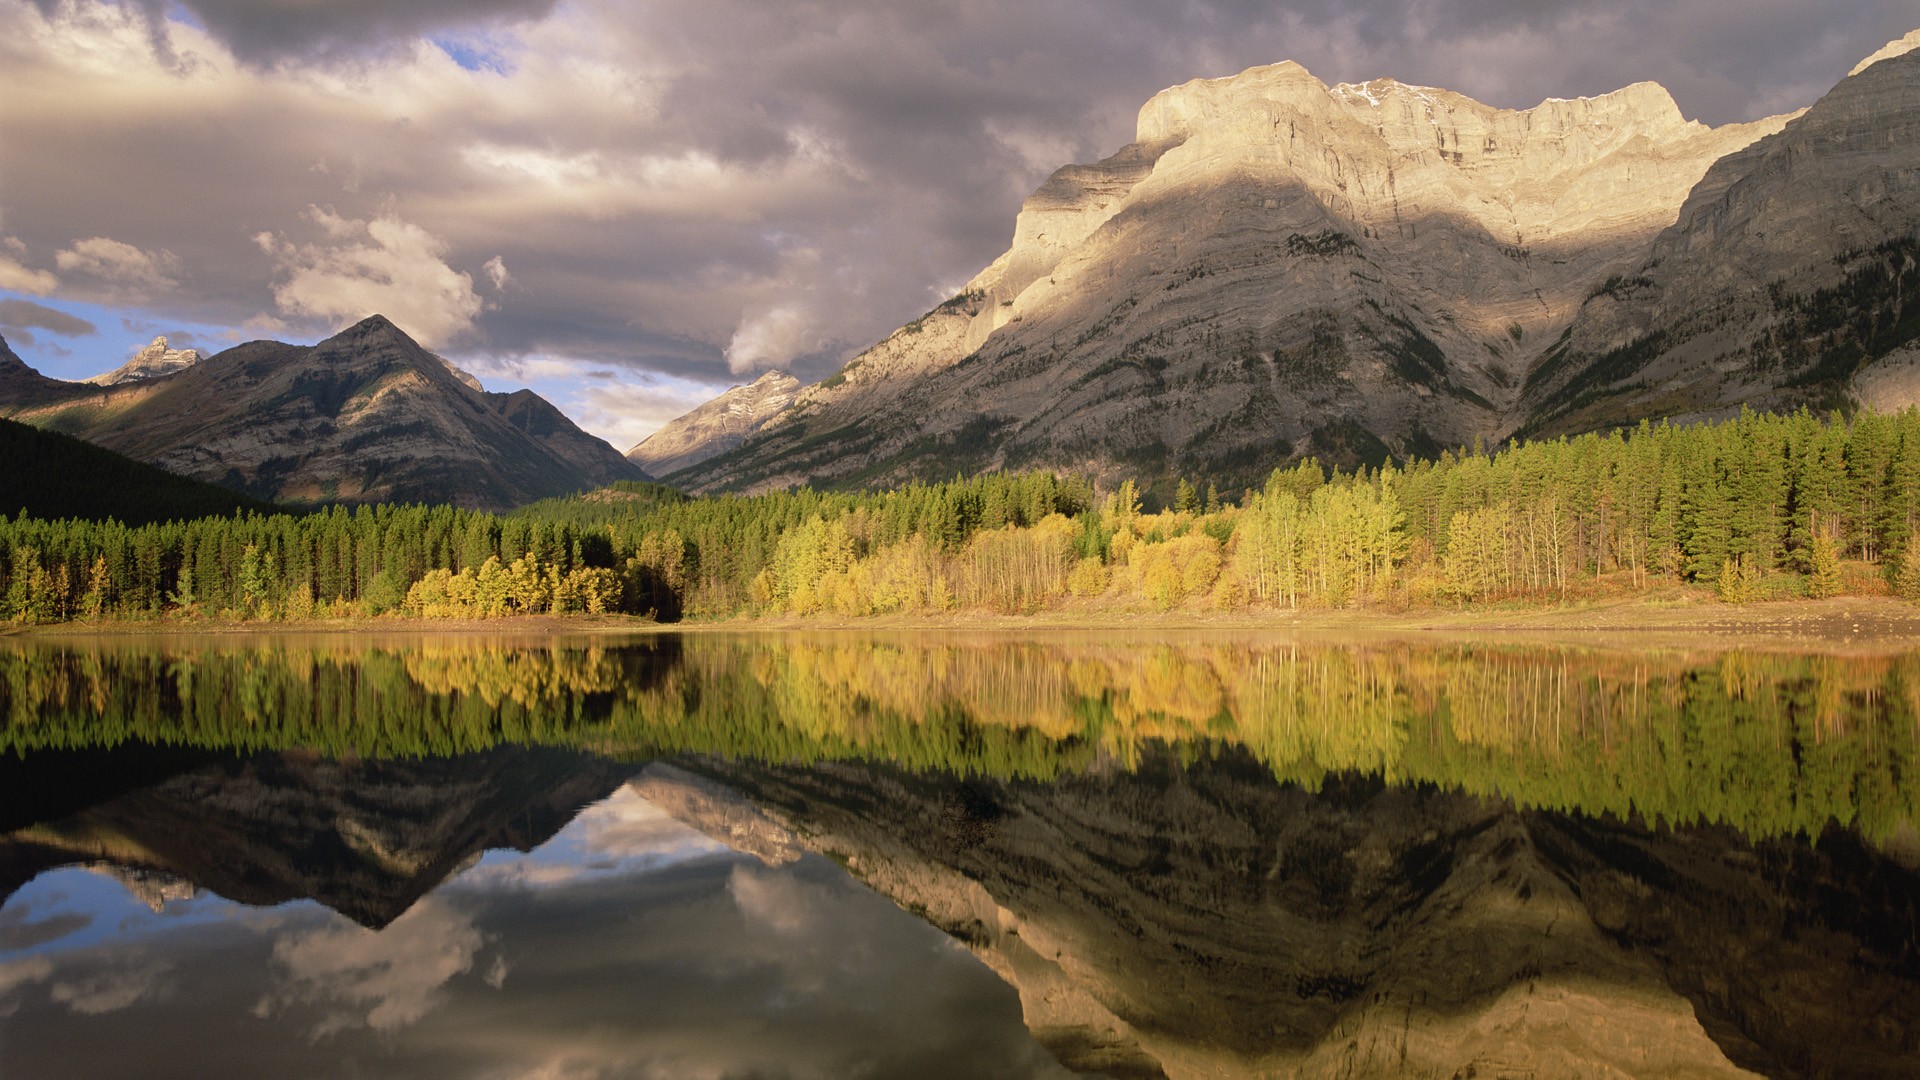 mountains, Landscapes, Nature, Fortress, Canada, Ponds, Alberta, Reflections, Mount Wallpaper